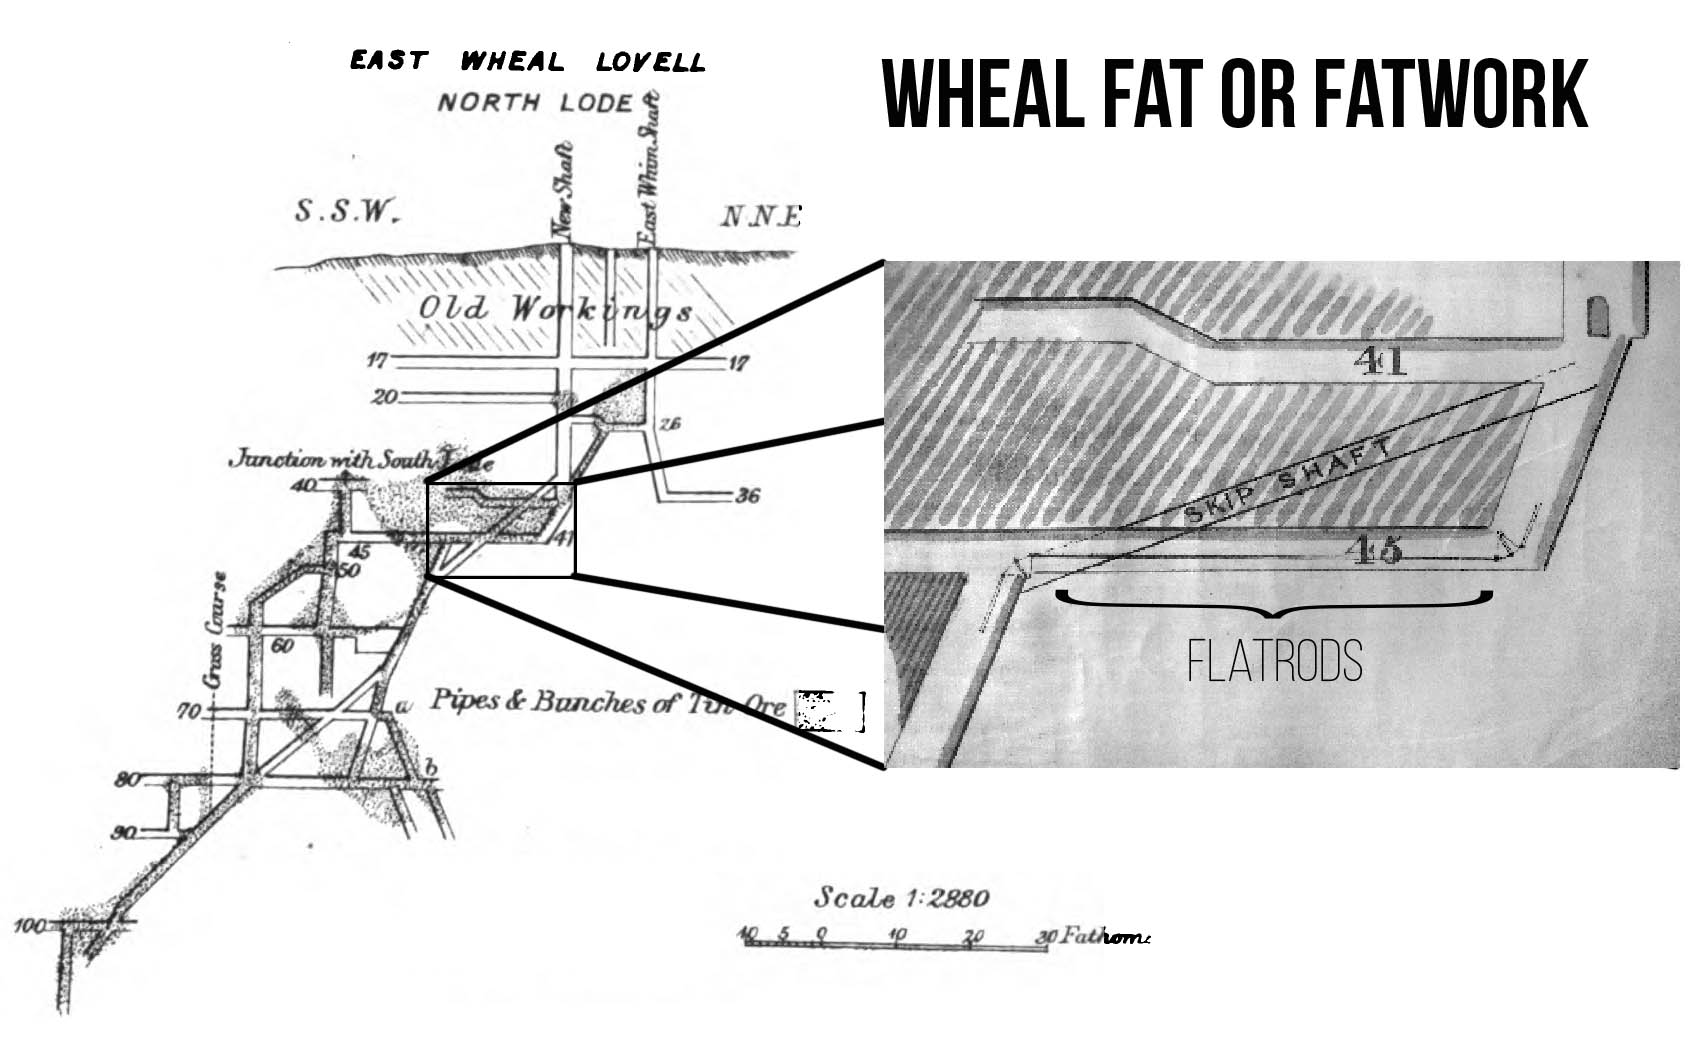 Section of Wheal Fat, or Fatworks, East Wheal Lovell, showing old workings.